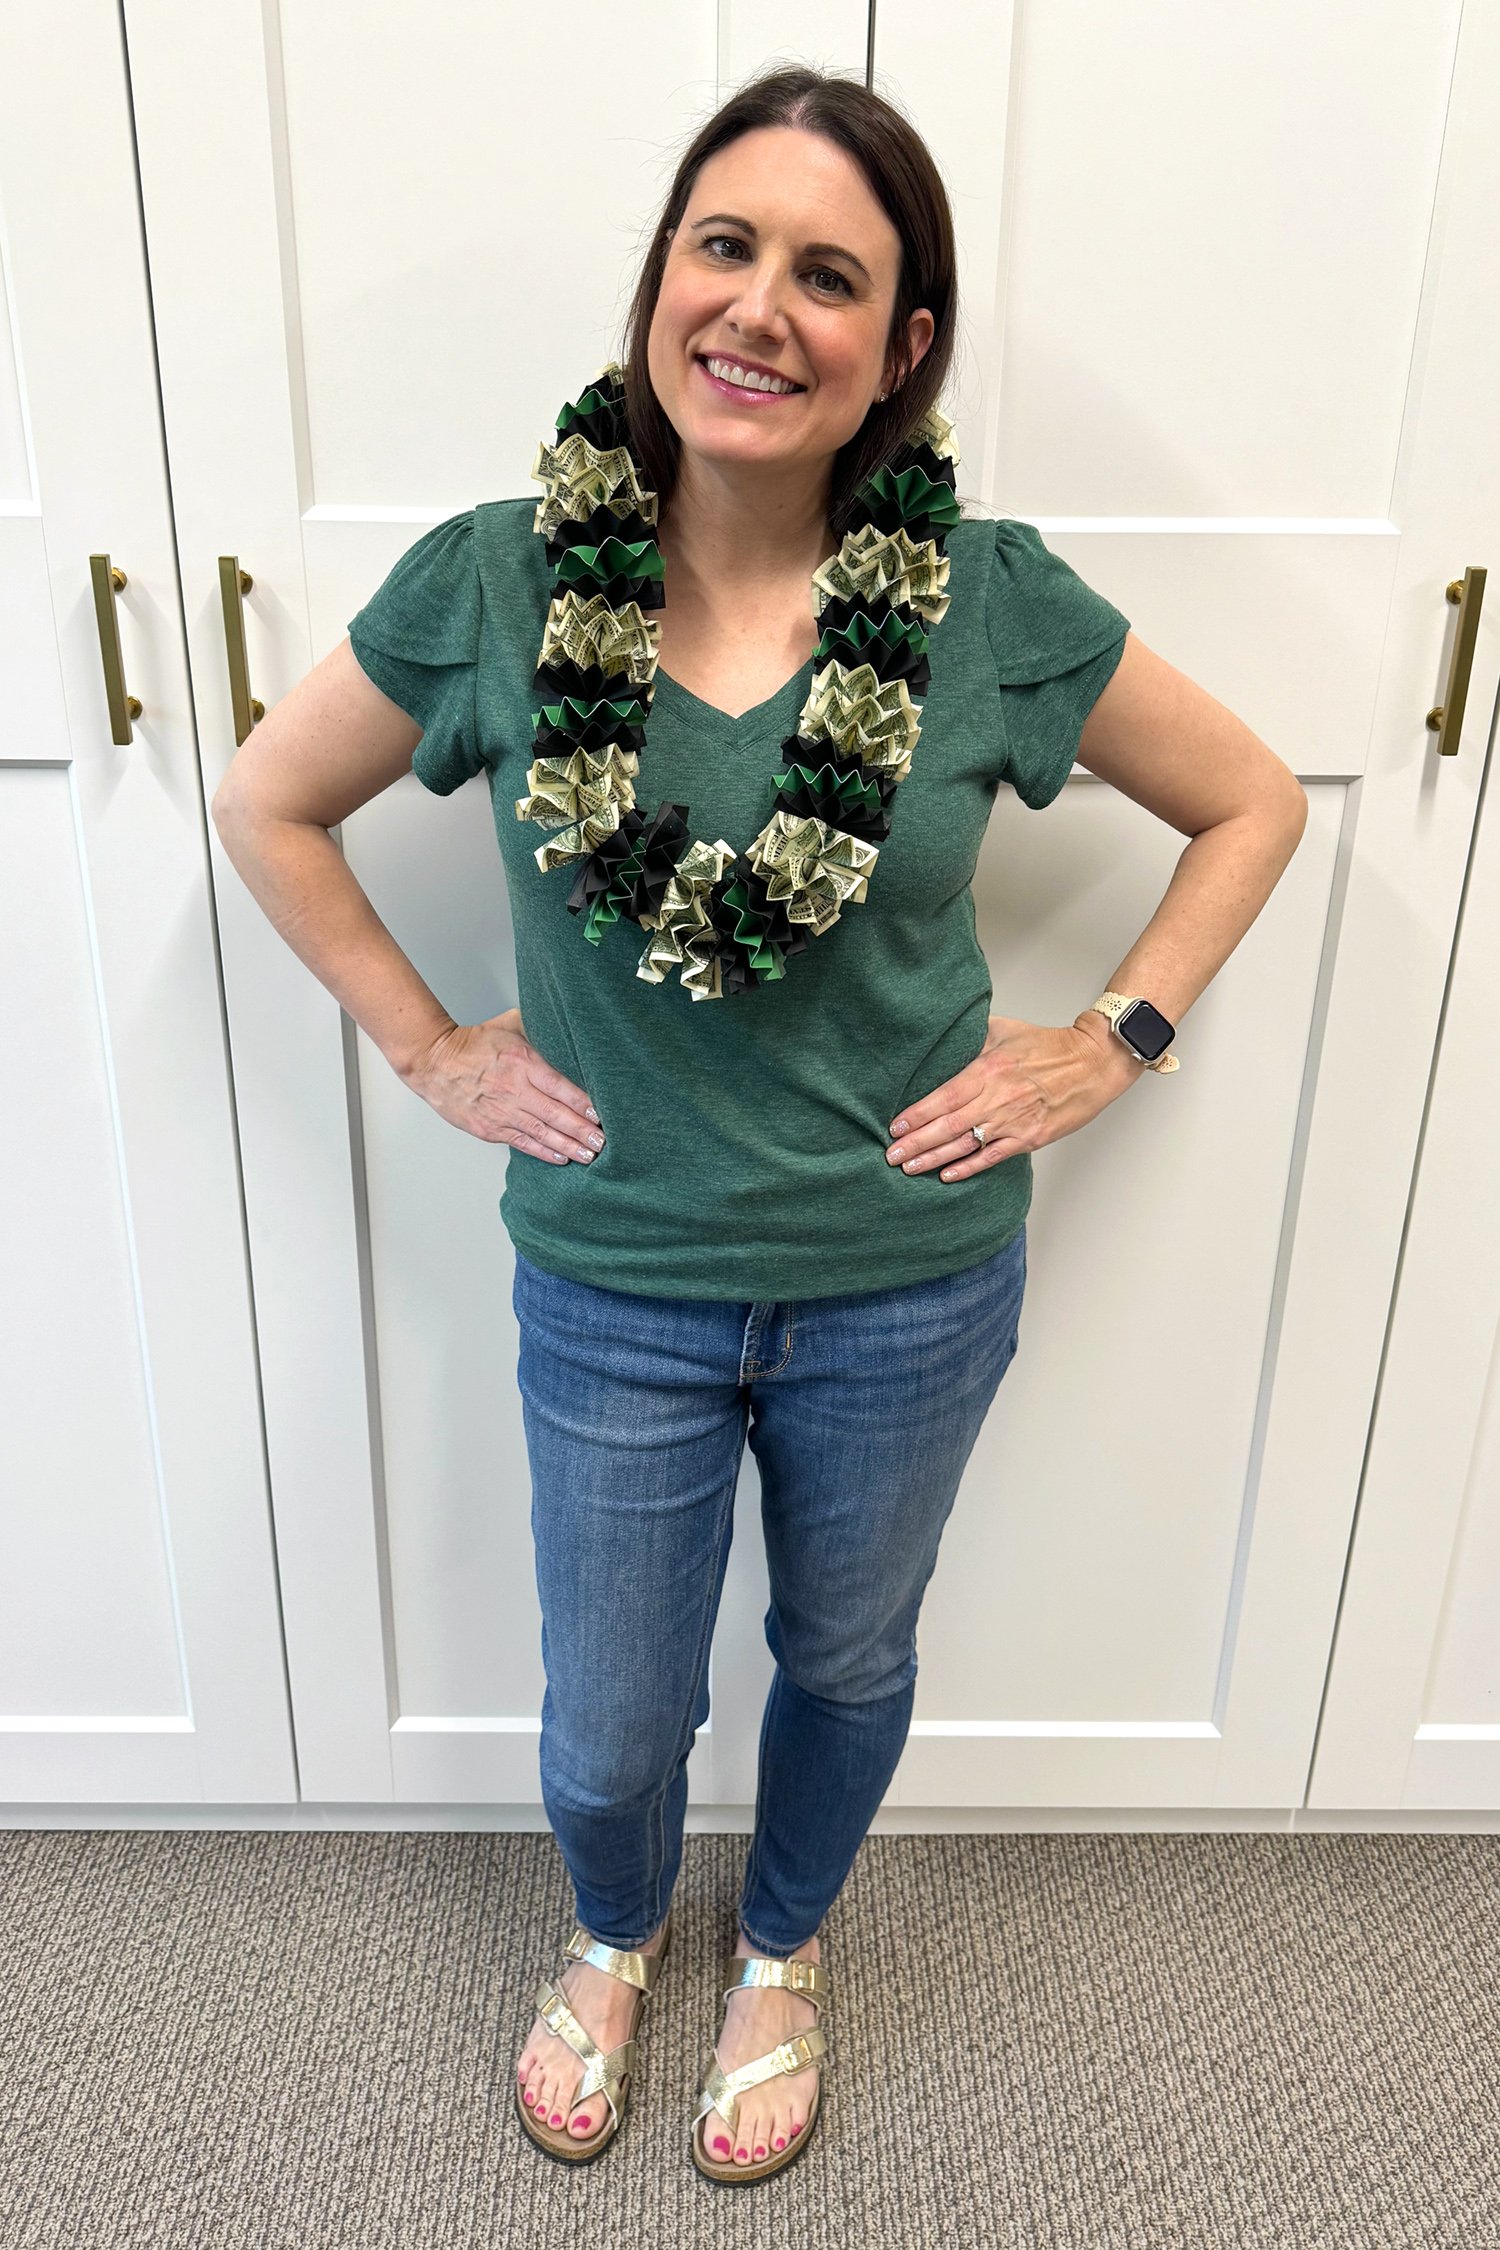 Dark haired woman in green shirt wearing a black and green graduation money lei